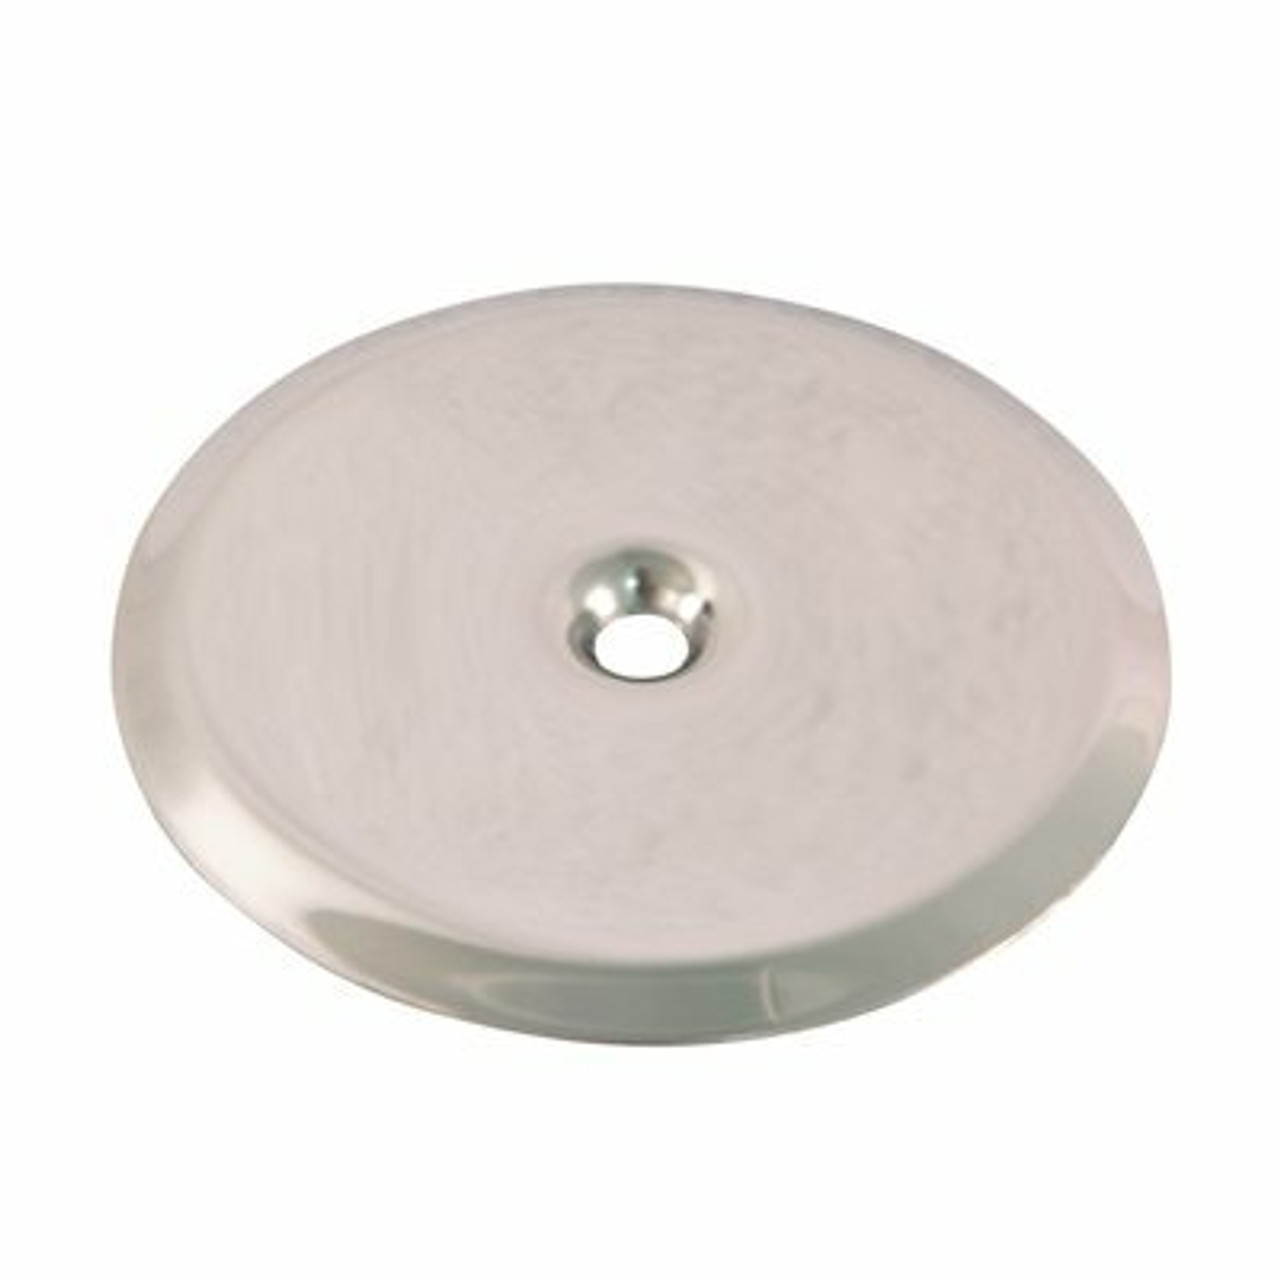 Proplus 10 In. 21 Gauge Stainless Steel Cleanout Cover